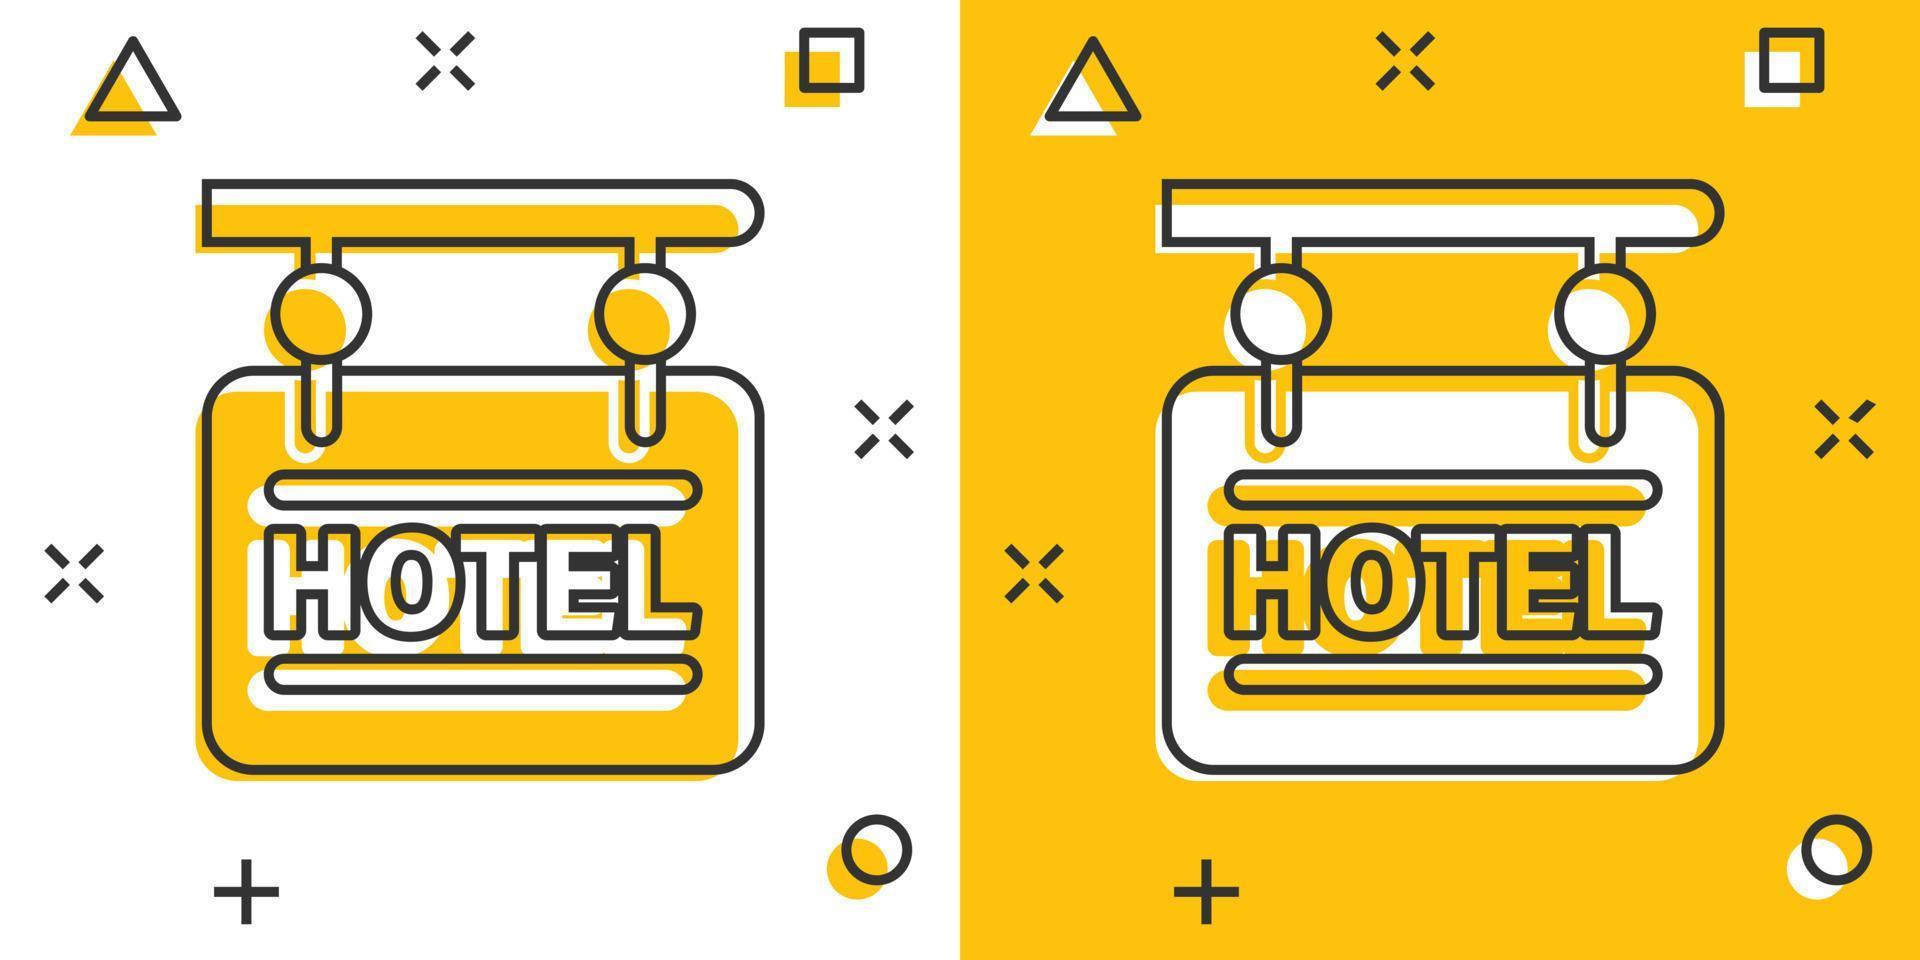 Hotel sign icon in comic style. Inn cartoon vector illustration on white isolated background. Hostel room information splash effect business concept.